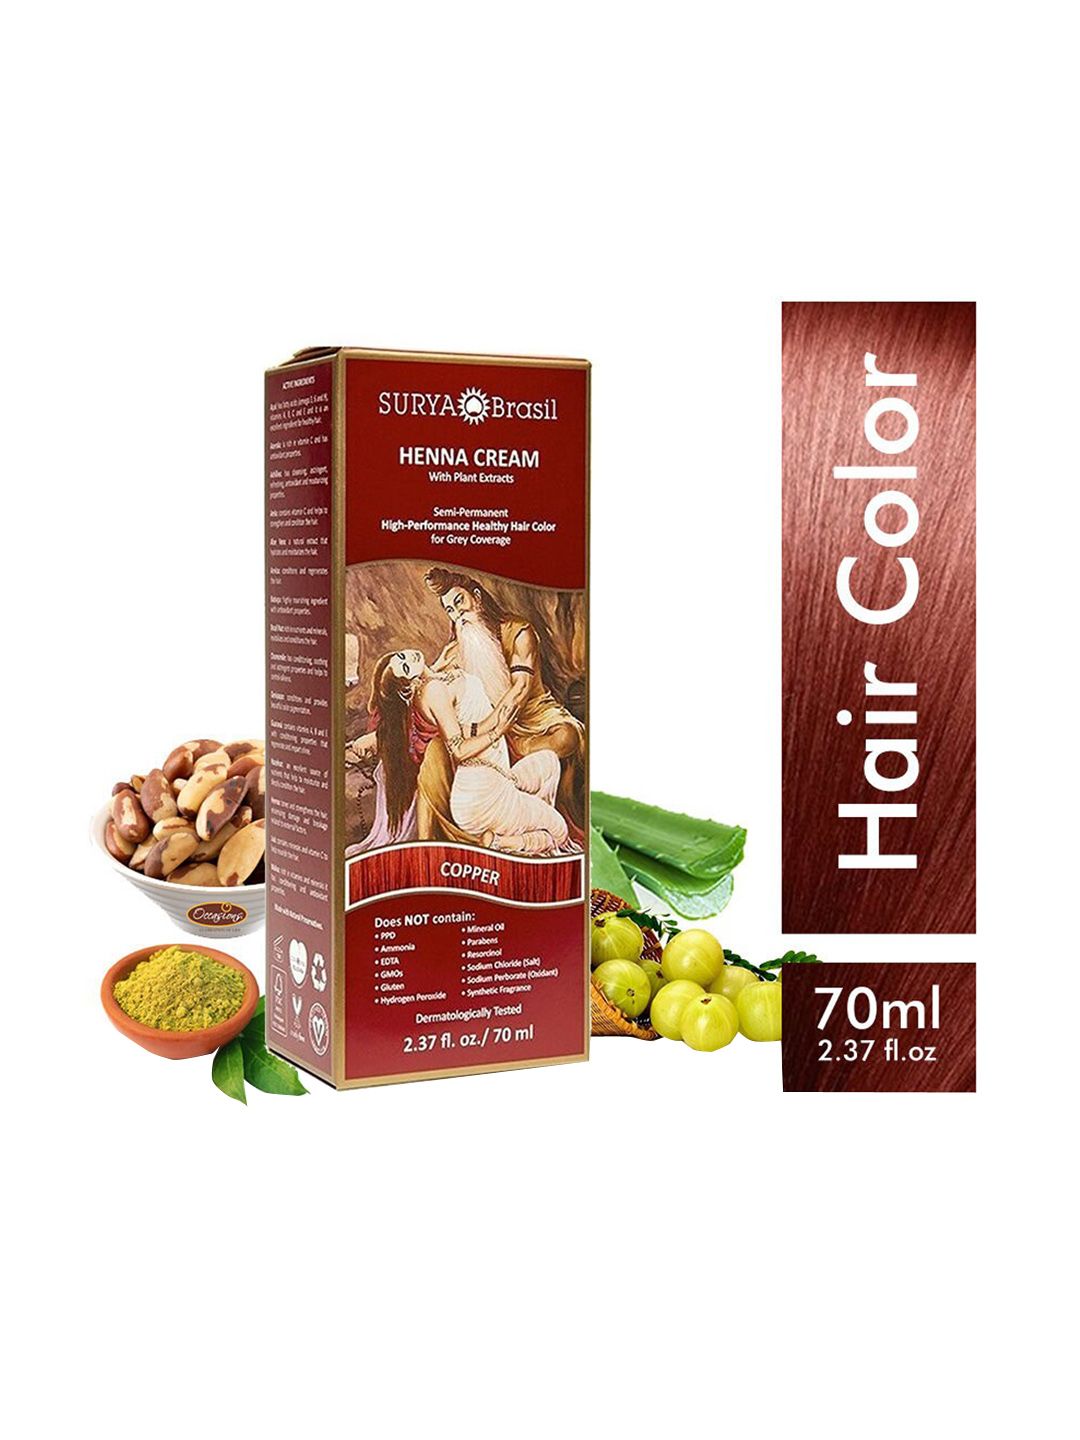 SURYA Brasil Henna Cream Semi-Permanent Hair Color with Plant Extracts 70ml - Copper Price in India